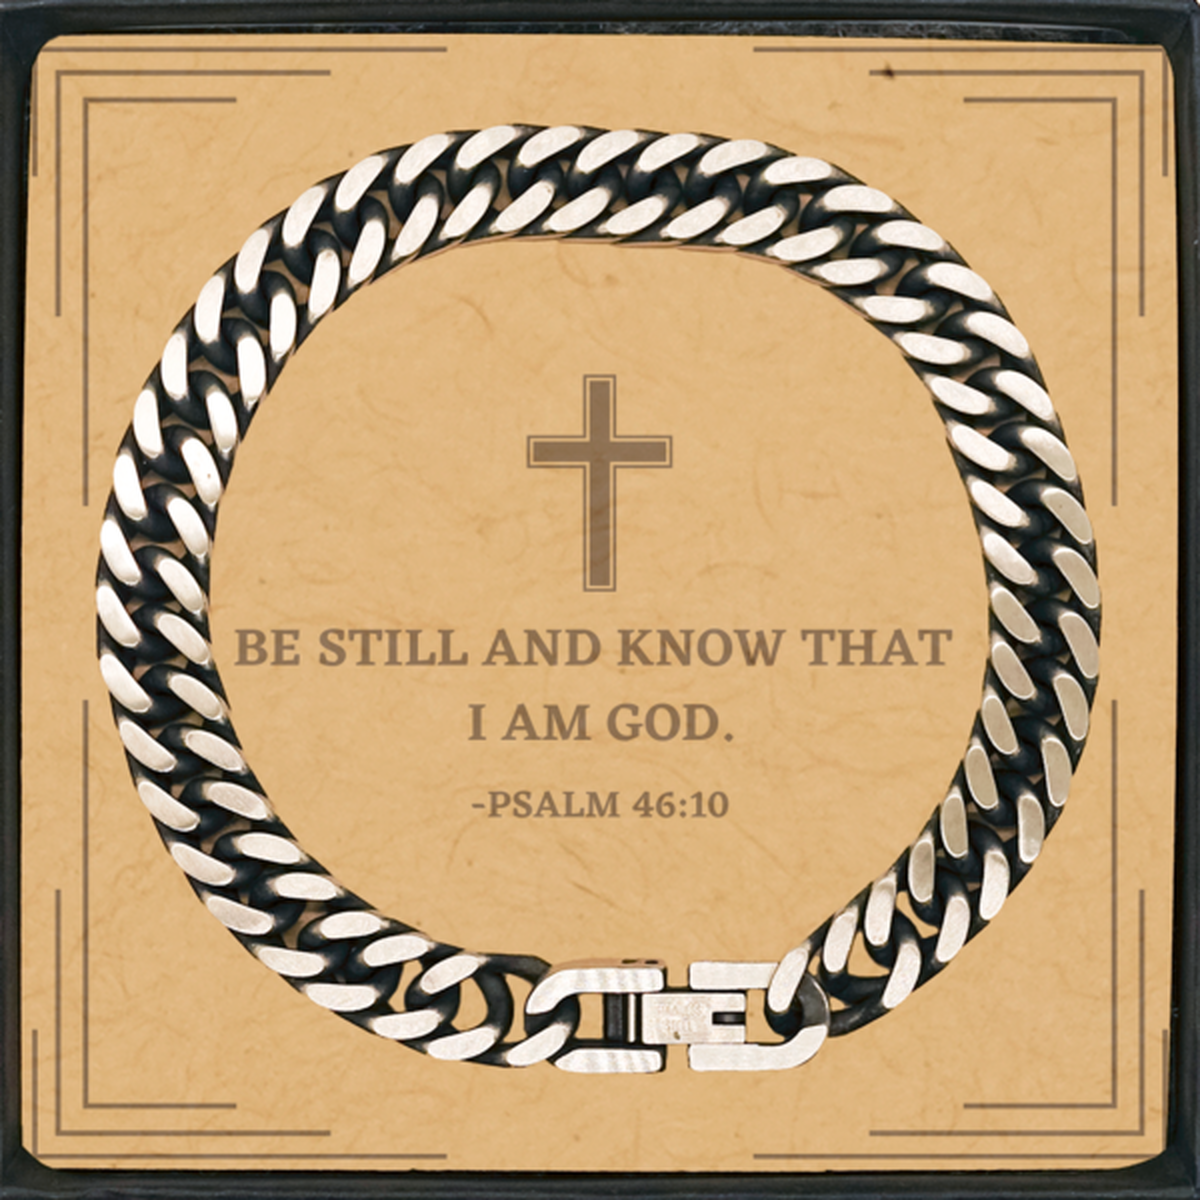 Baptism Gifts For Teenage Boys Girls, Christian Bible Verse Cuban Link Chain Bracelet, Be still and know that I am god, Confirmation Gifts, Bible Verse Card for Son, Godson, Grandson